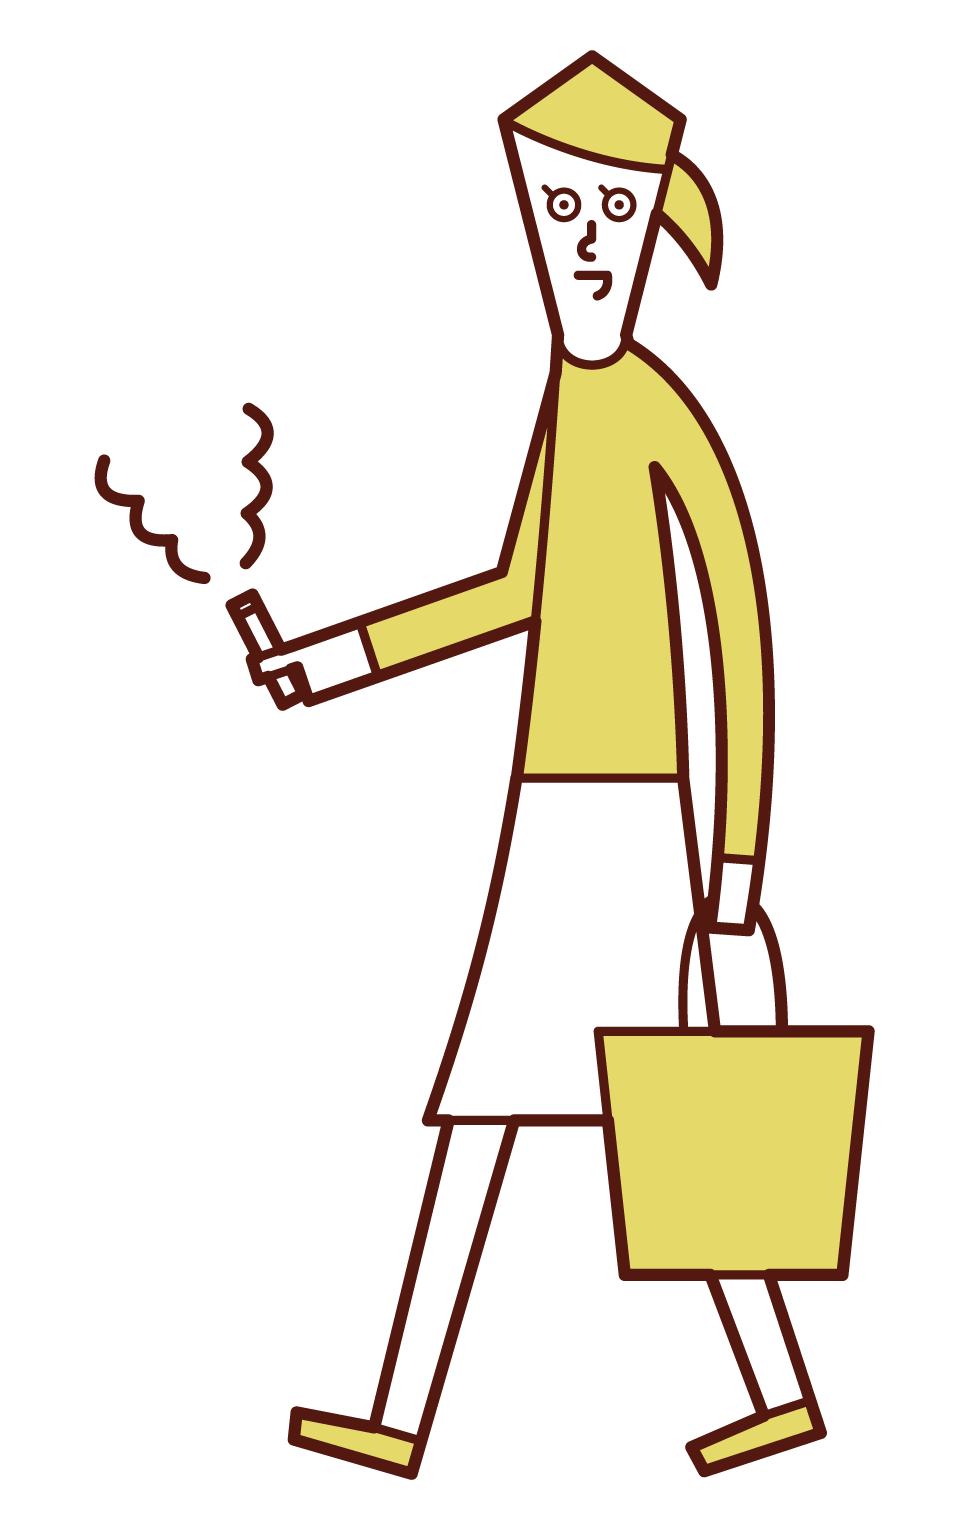 Illustration of a woman smoking a cigarette while walking